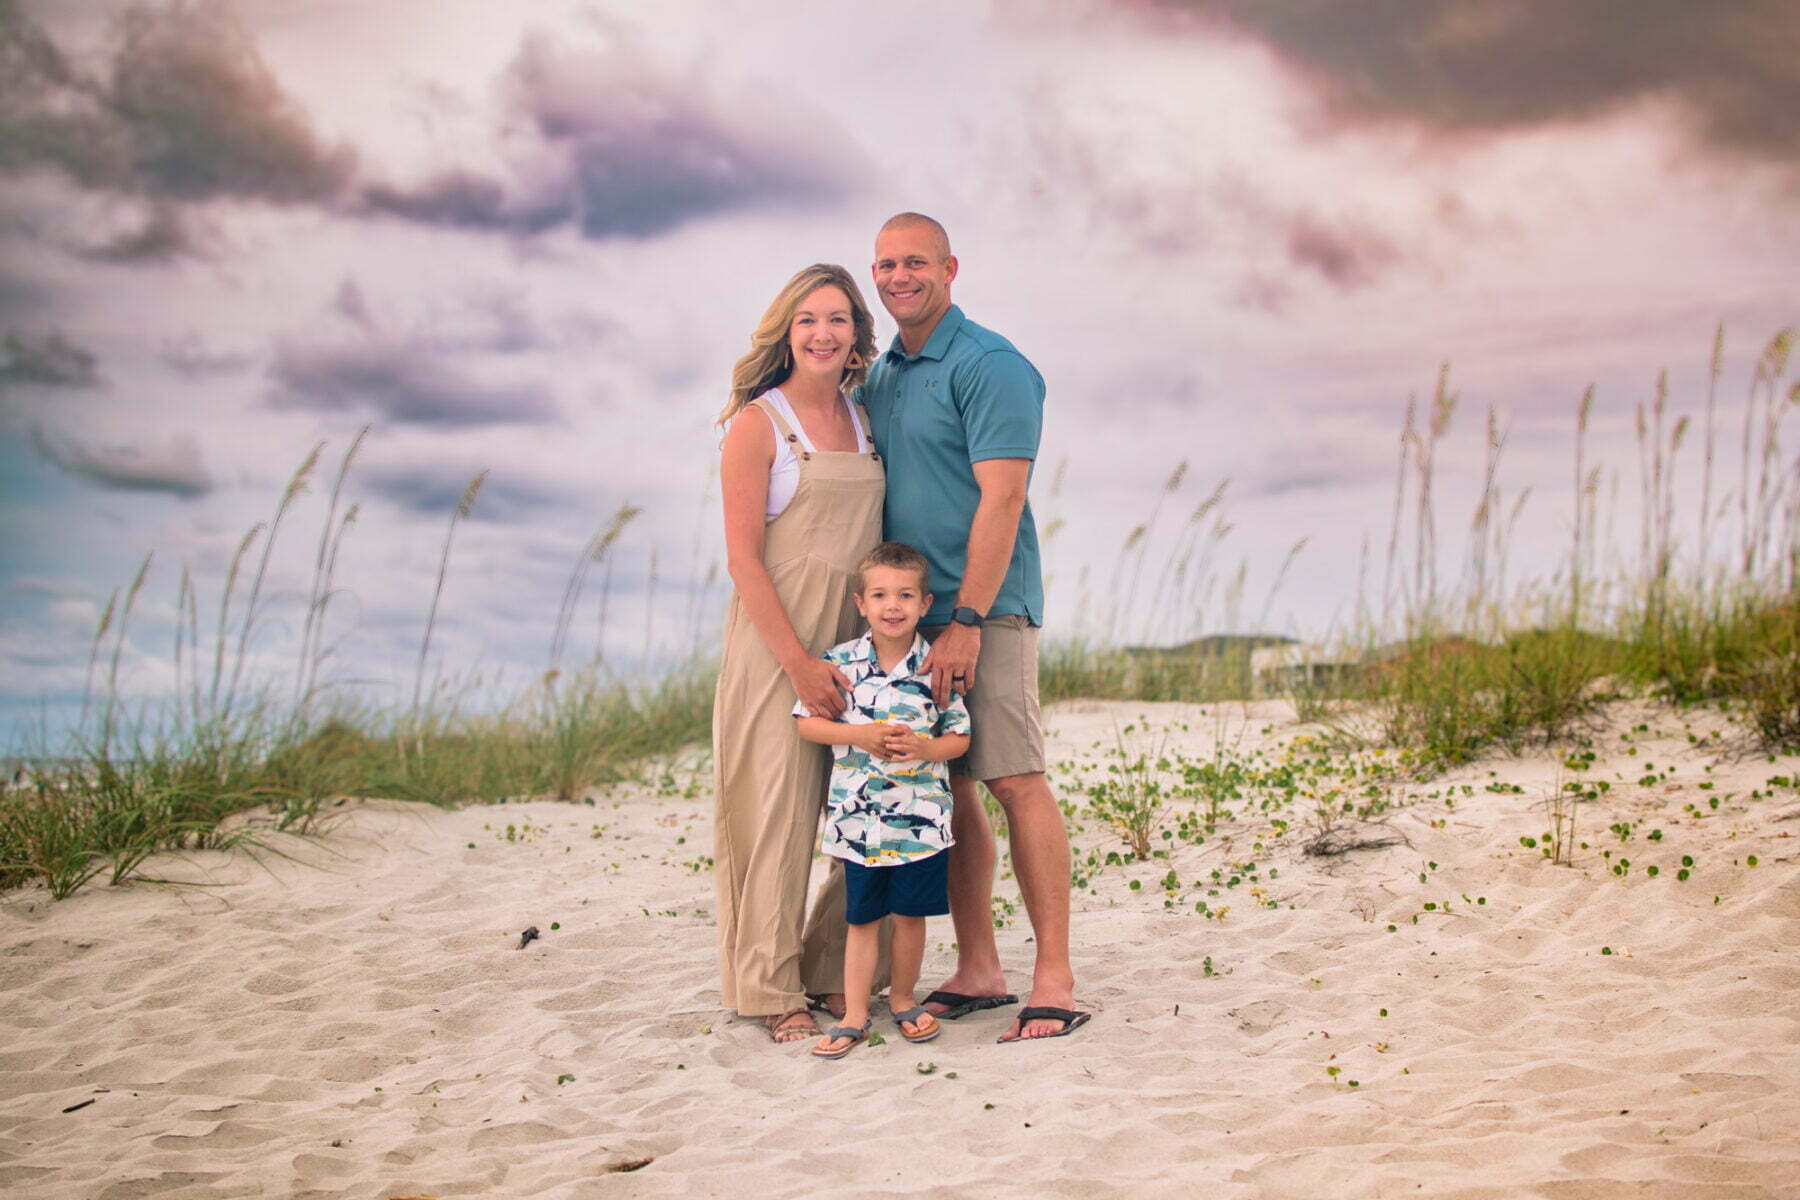 Lifestyle family portrait photography session in Ocean Isle Beach, North Carolina.